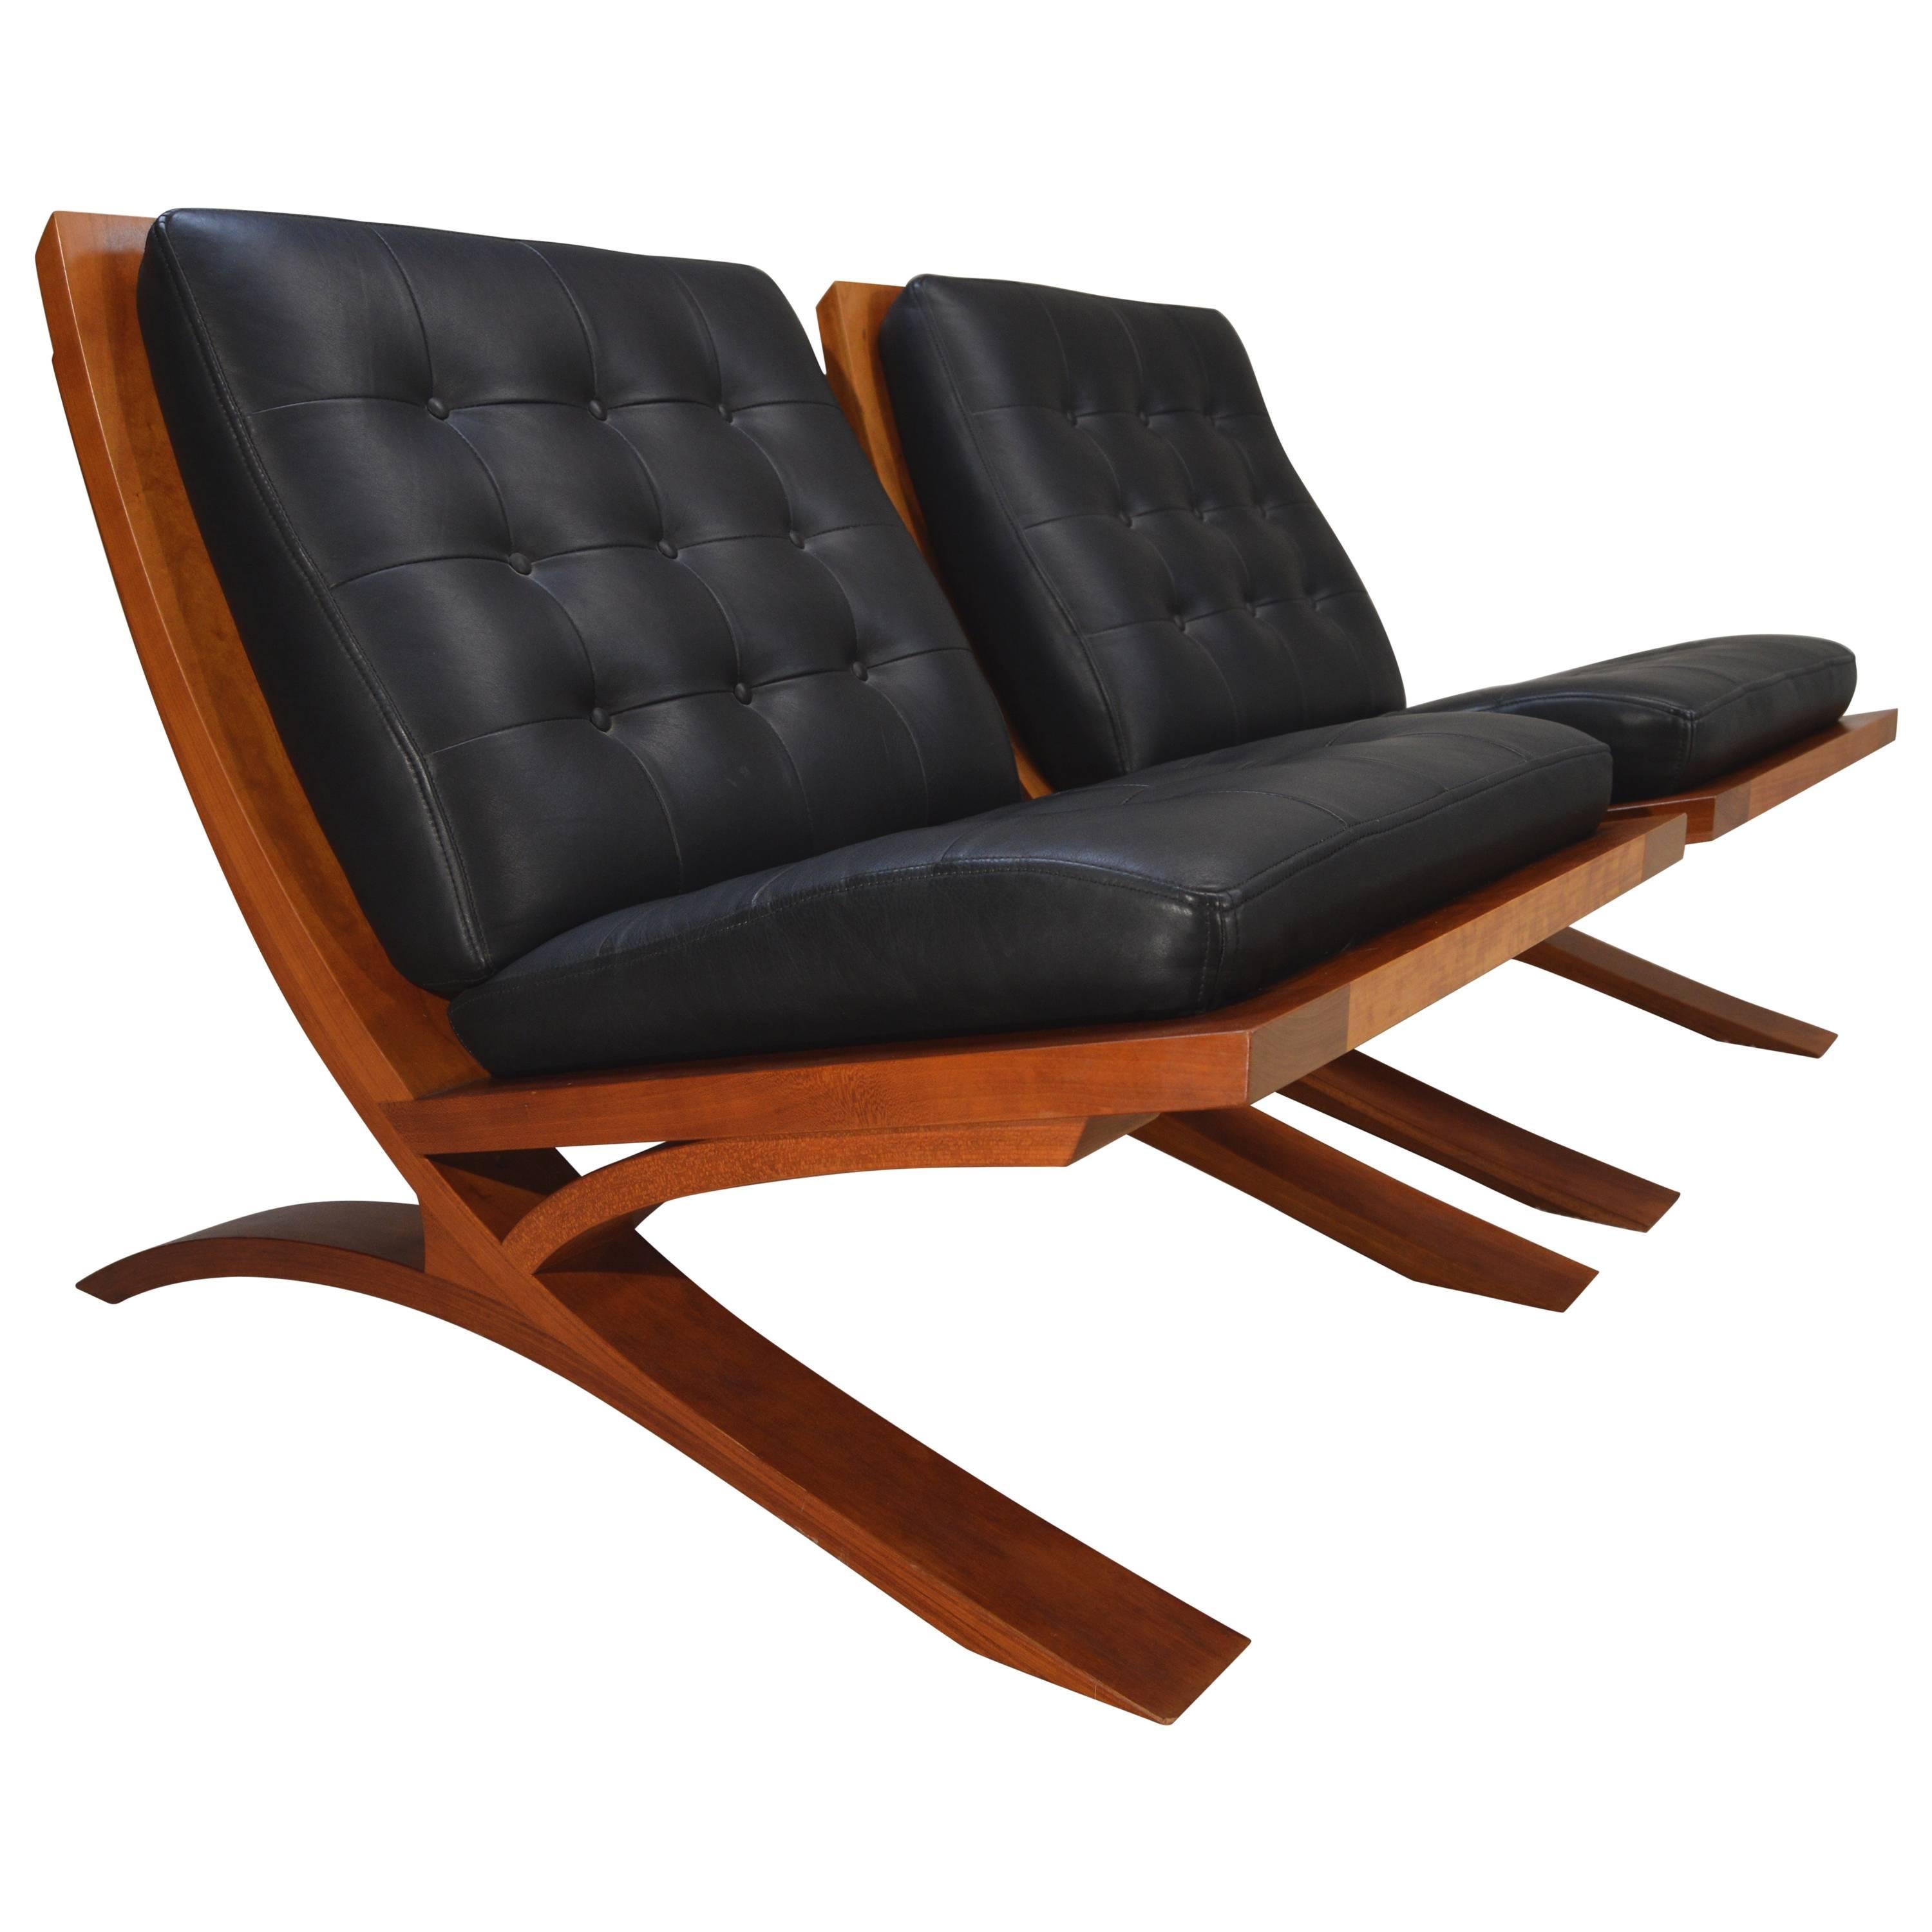 Pair of "VITA Collection" Cherry and Leather Lounge Chairs by Thomas Moser